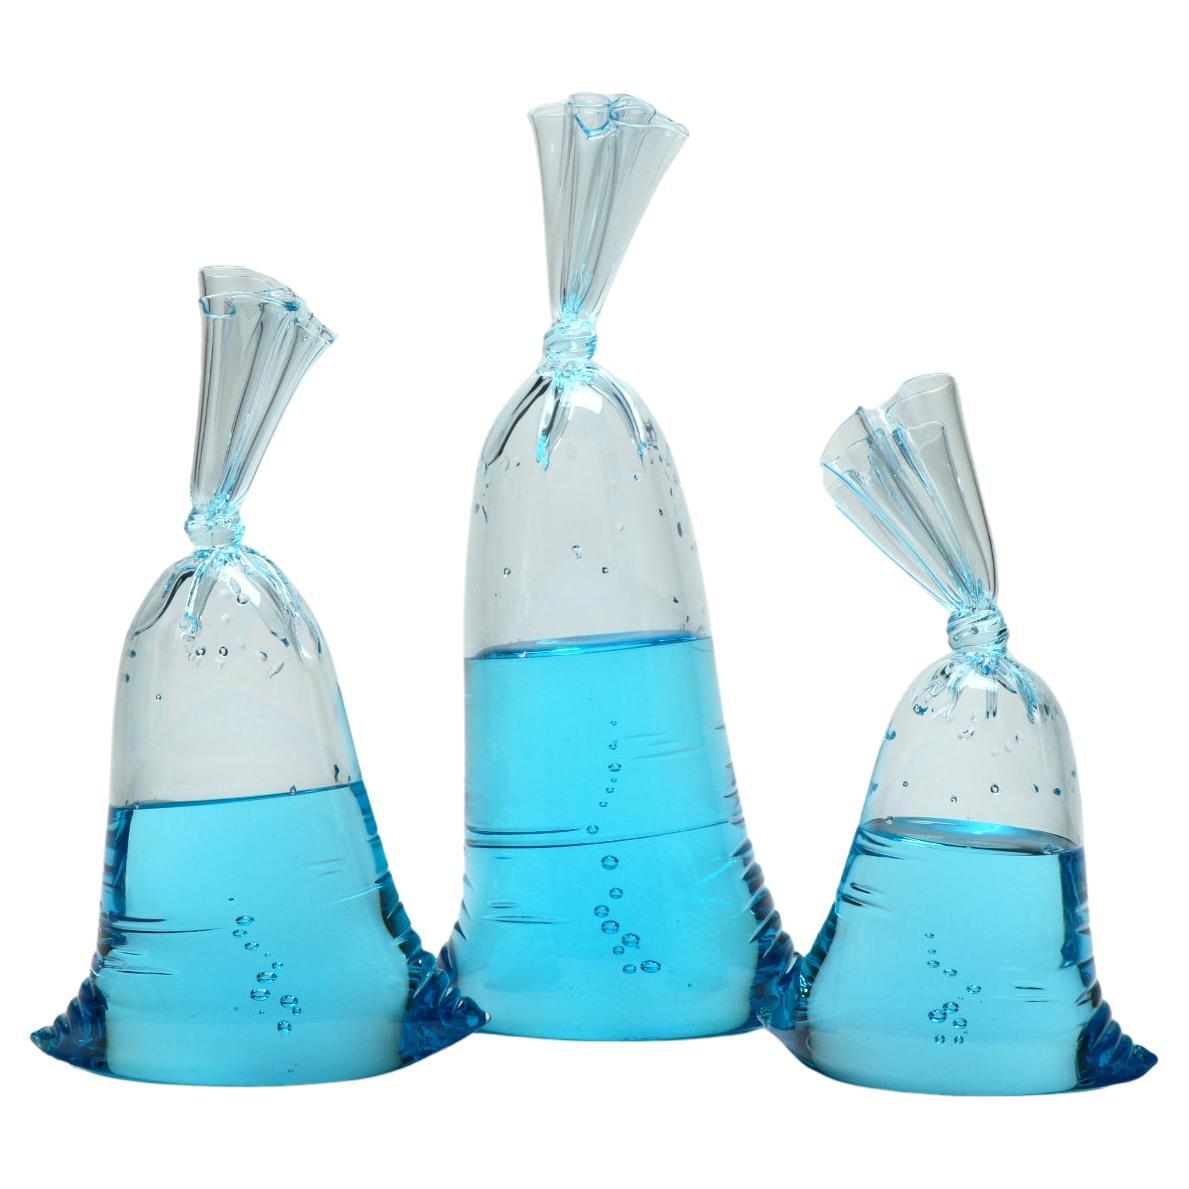 Hyperreal blue glass water bag trio sculpture installation For Sale